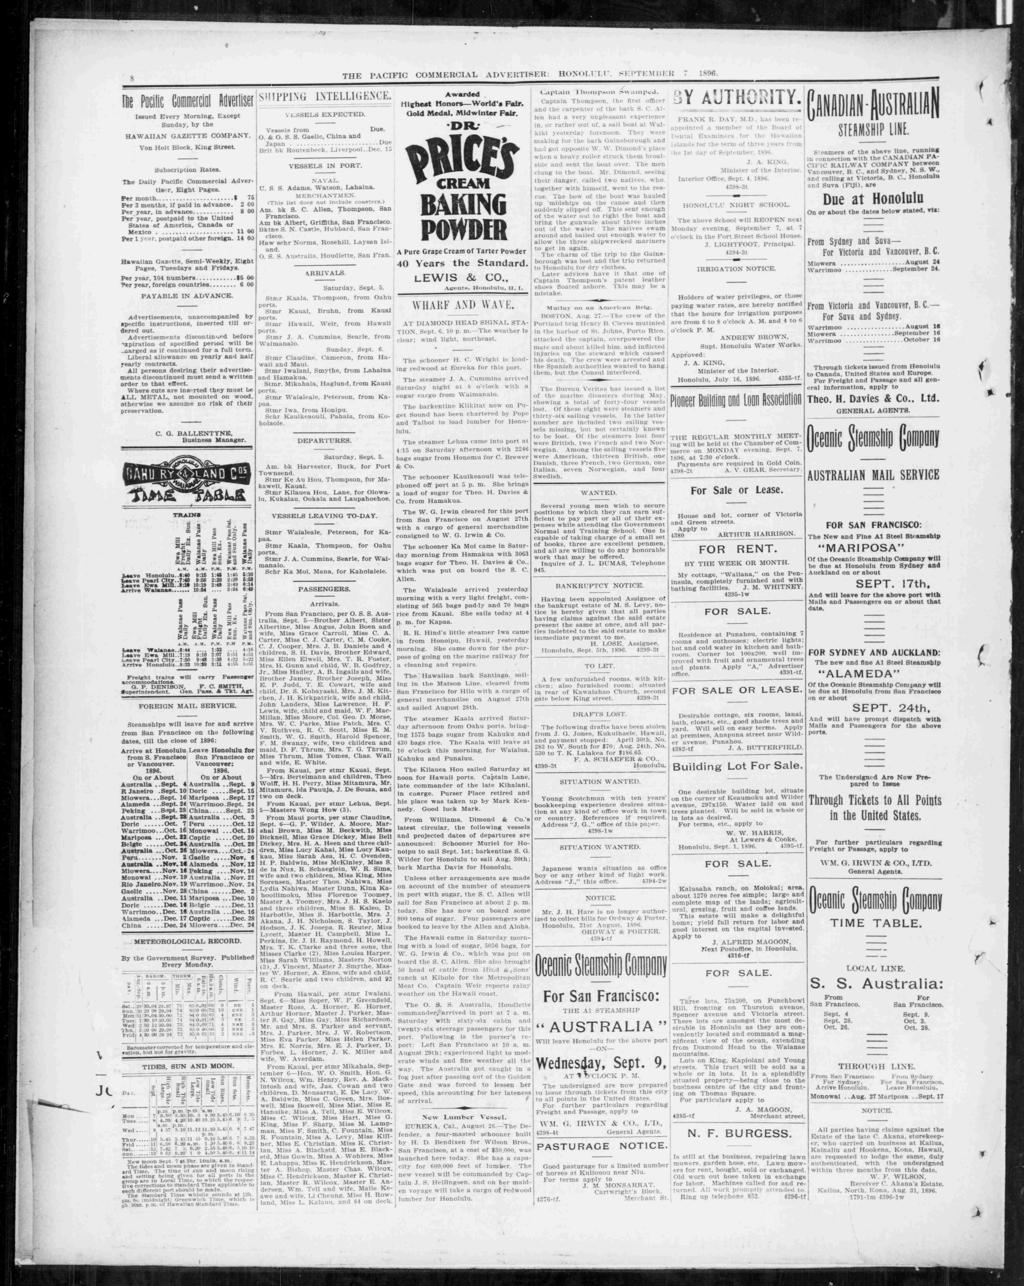 m s THE PACFC COMMERCAL ADVERTSER : HONOLULU. SEPTEMBER 896. me Pgclc Commercal Mertse ssued Every Mornng, Ecept Sunday, by the HAWAAN GAZETTE COMPANY, Von Holt Block, Kng Street, Subscrpton Rates.